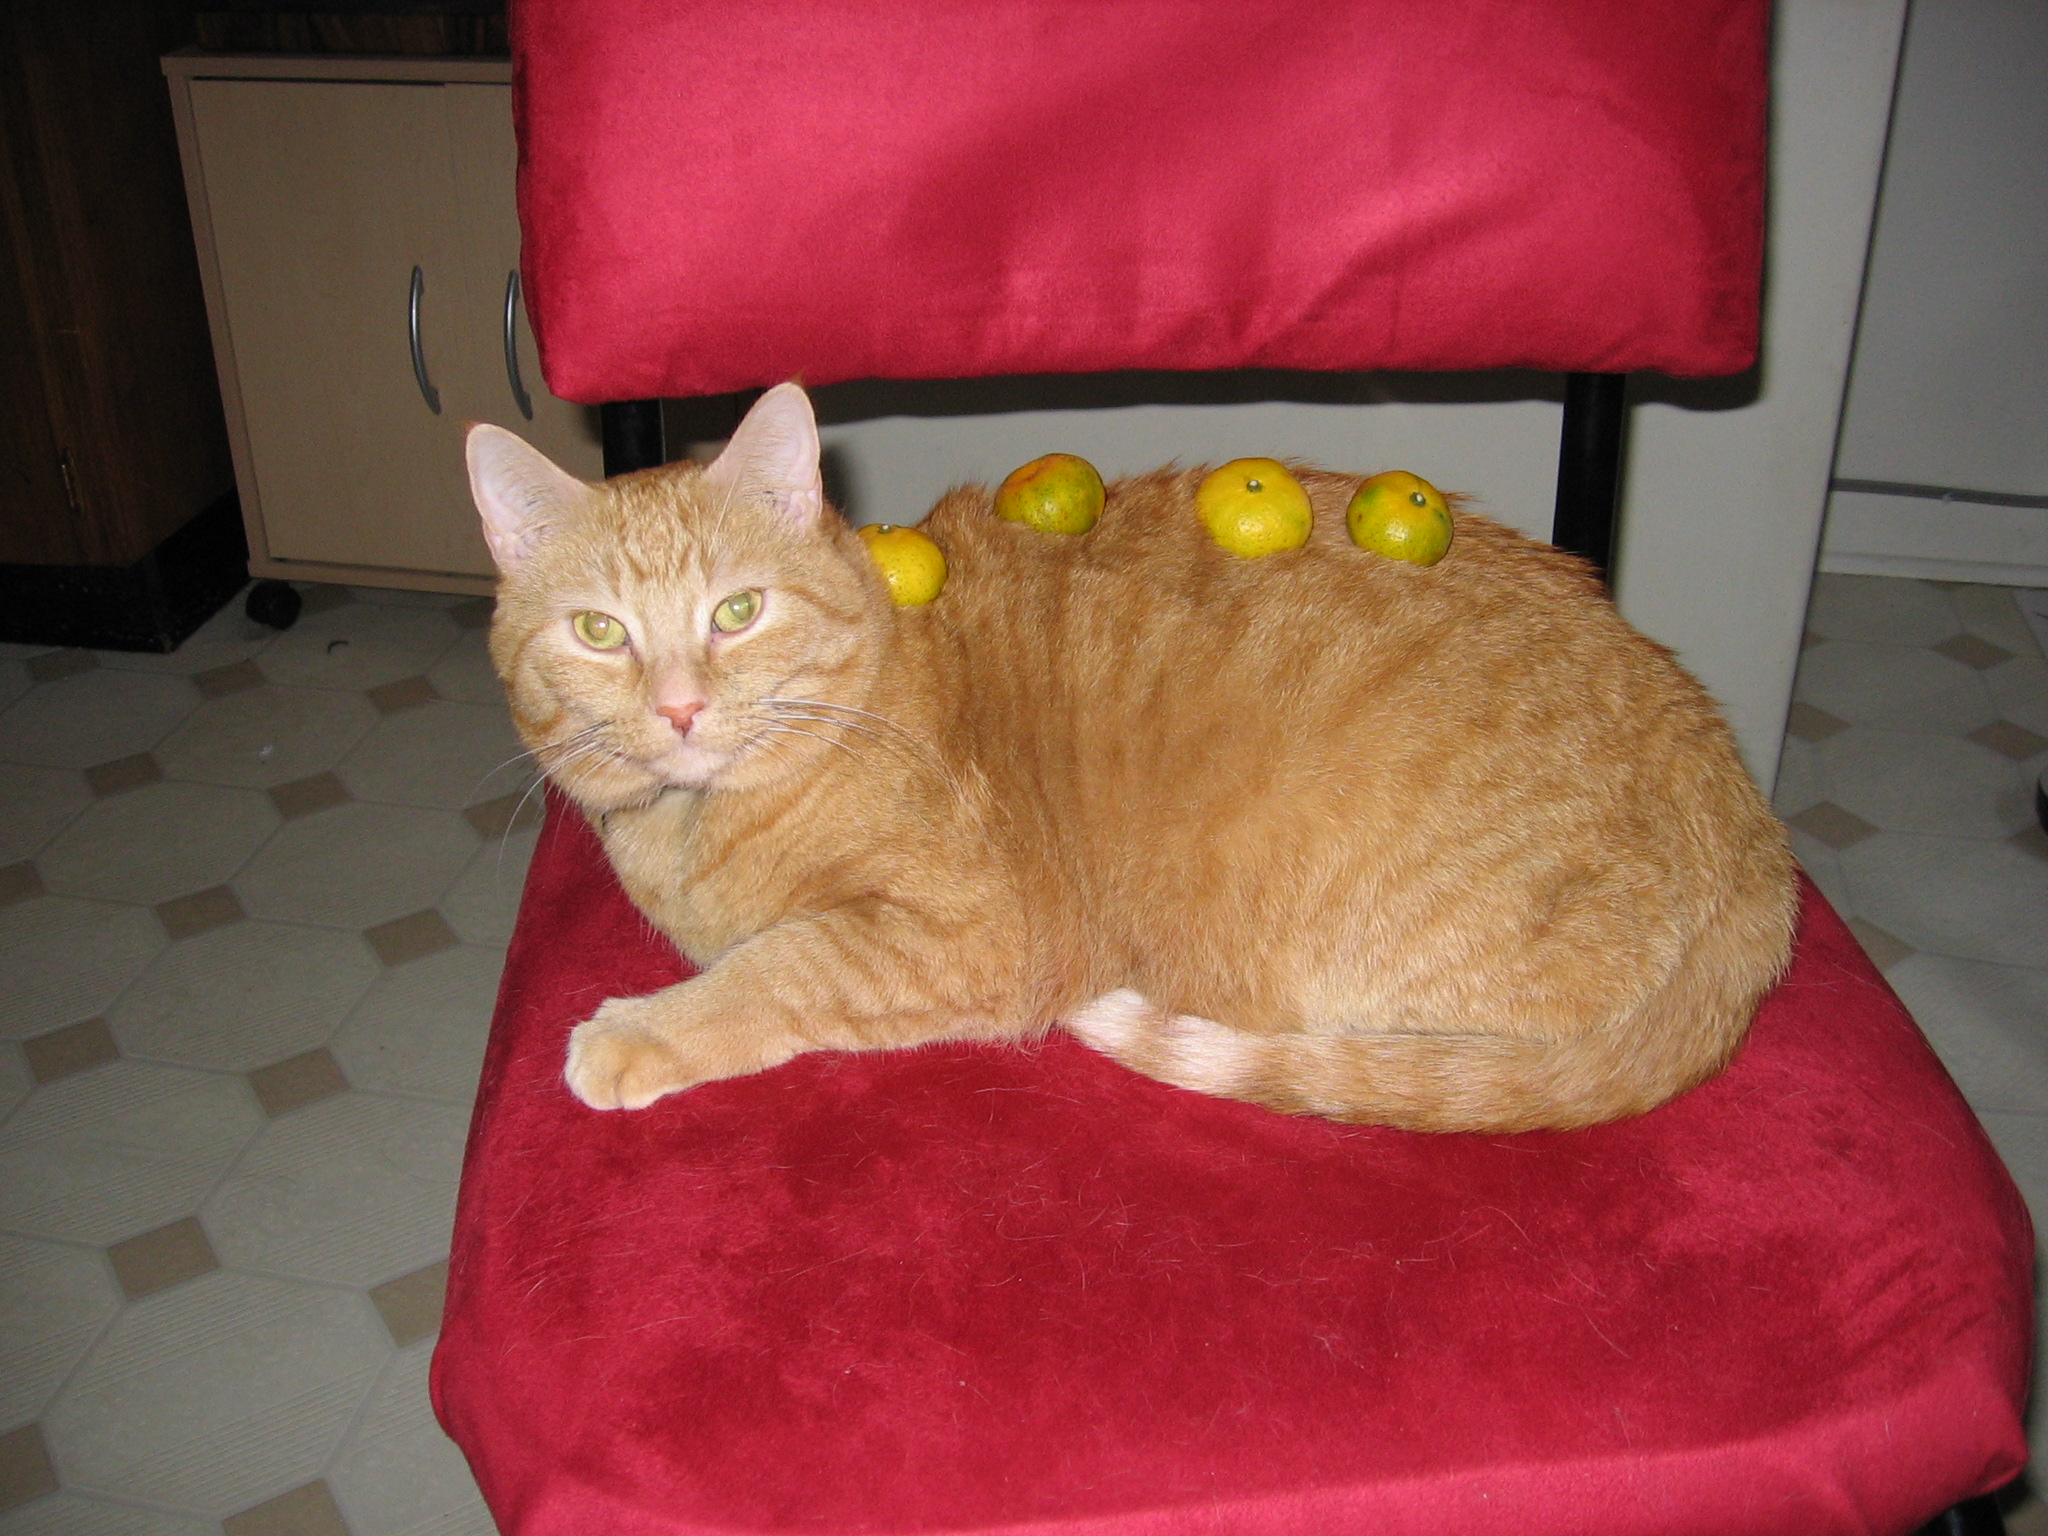 Jack on a red chair in a linoleum kitchen, with four oranges balanced on his back.